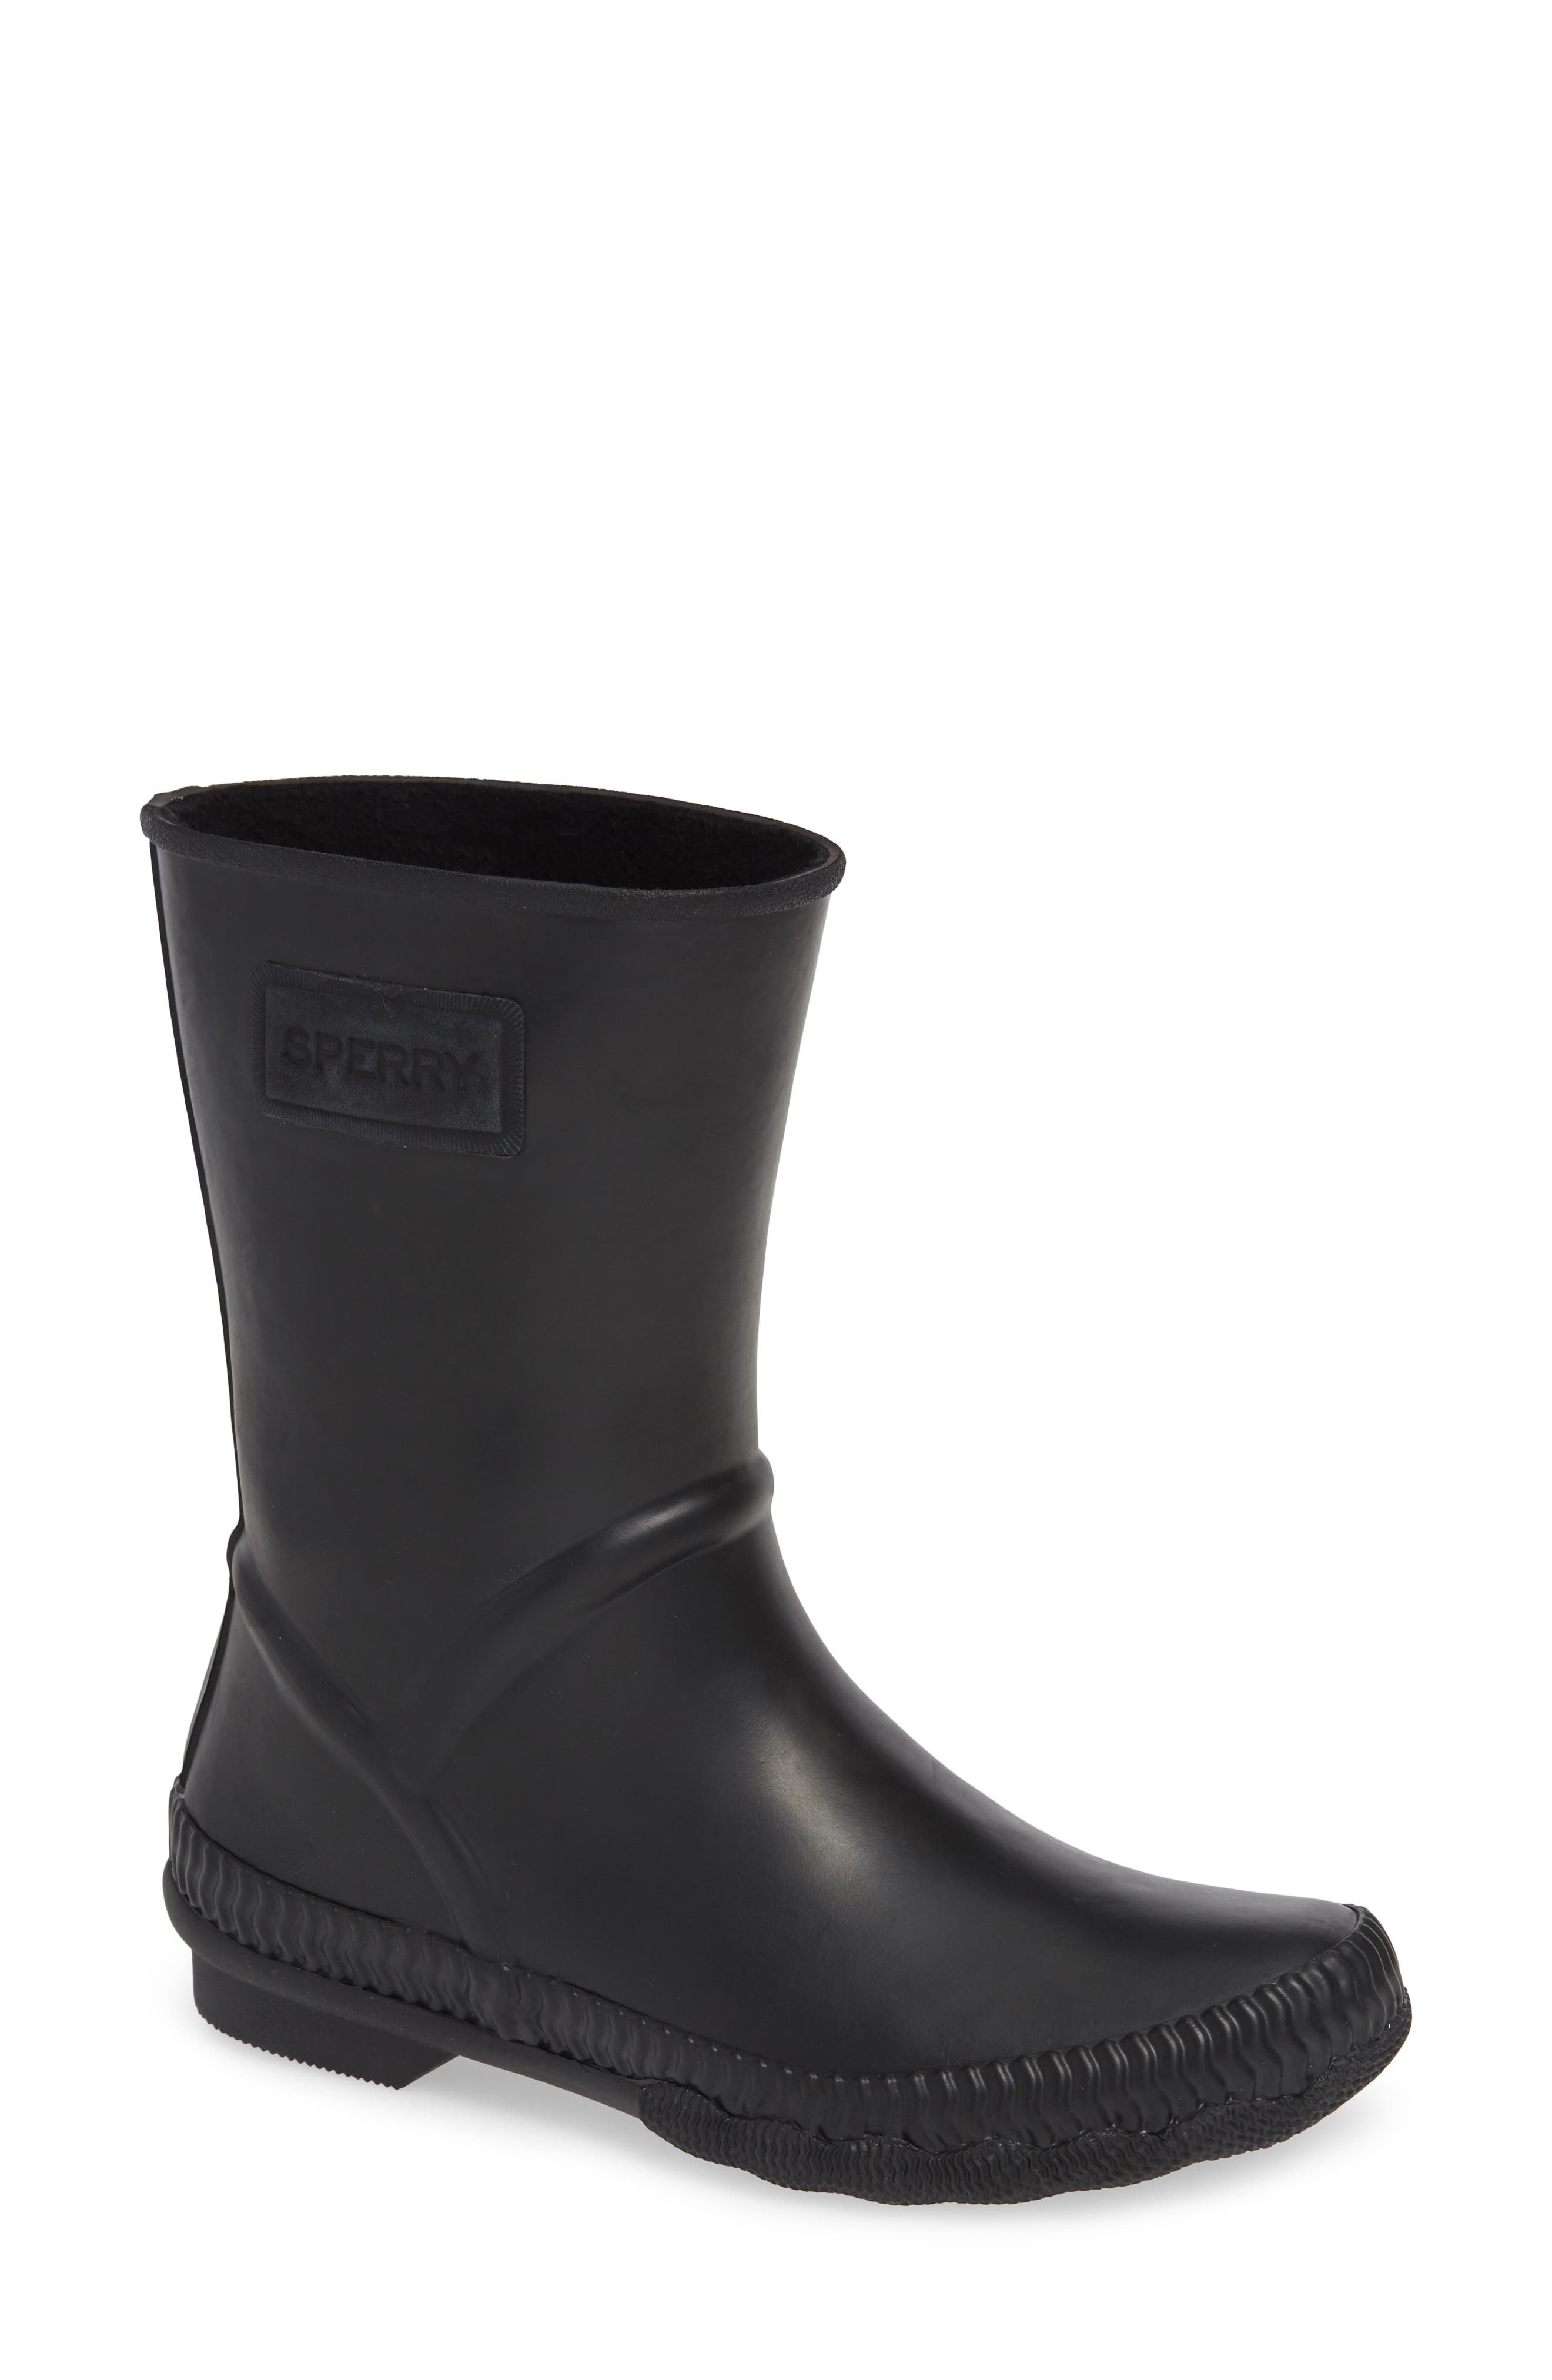 sperry saltwater current rain boots